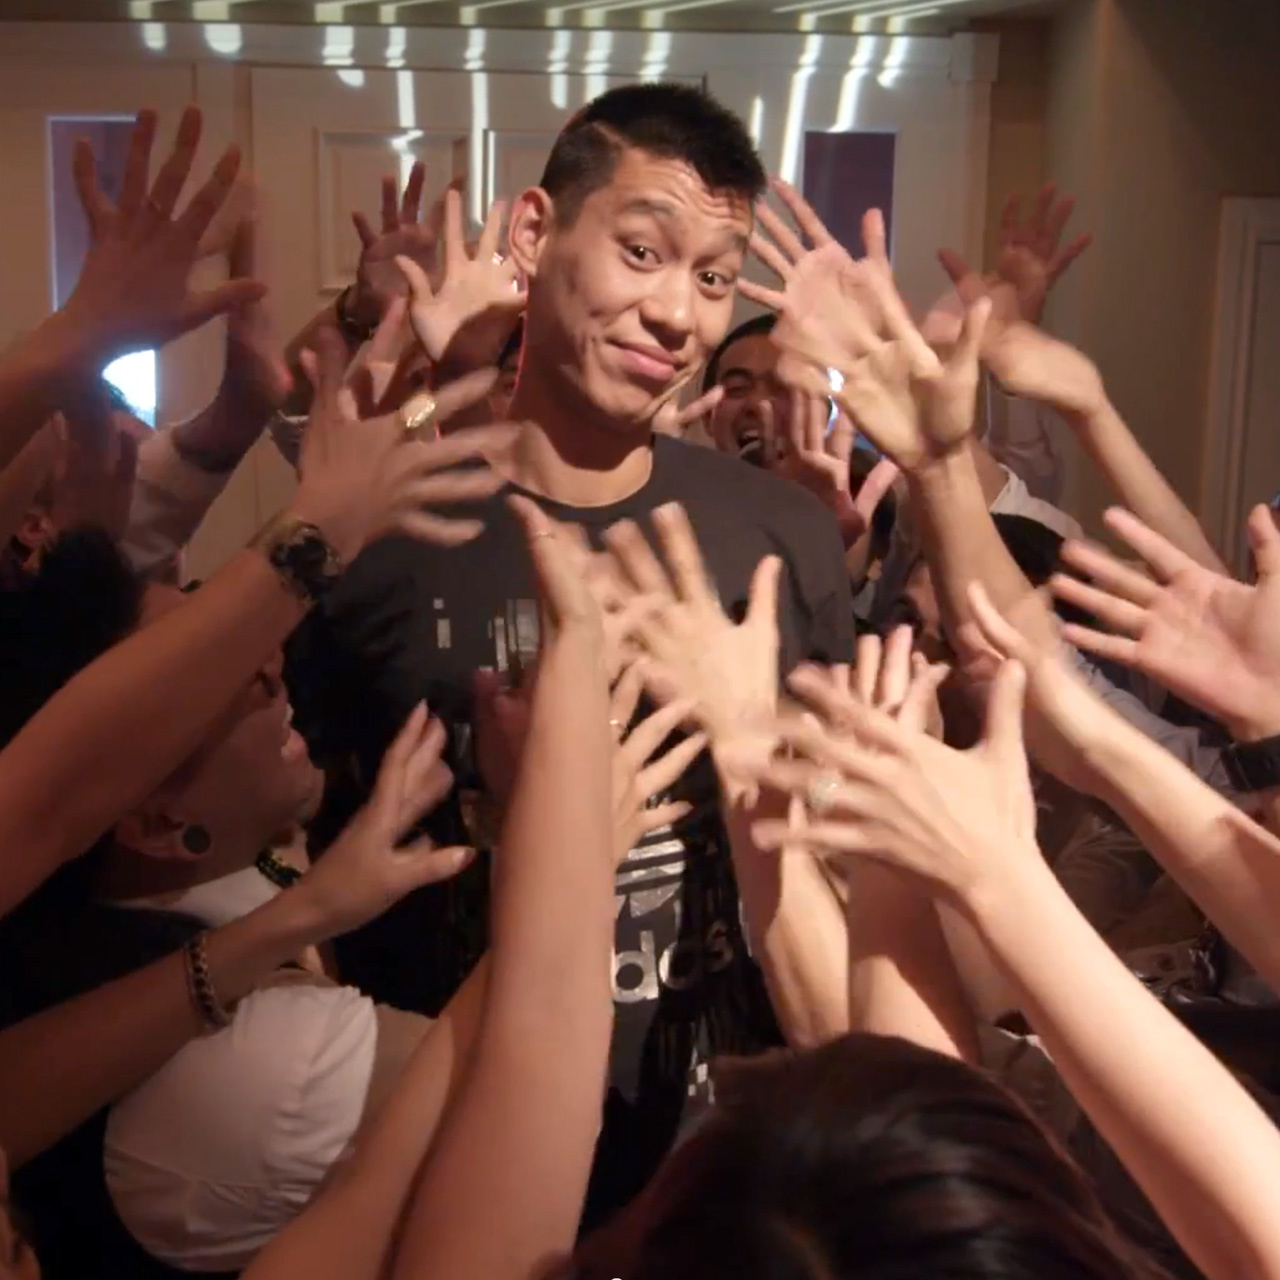 Lakers guard Jeremy Lin gets by with a little help from his friends